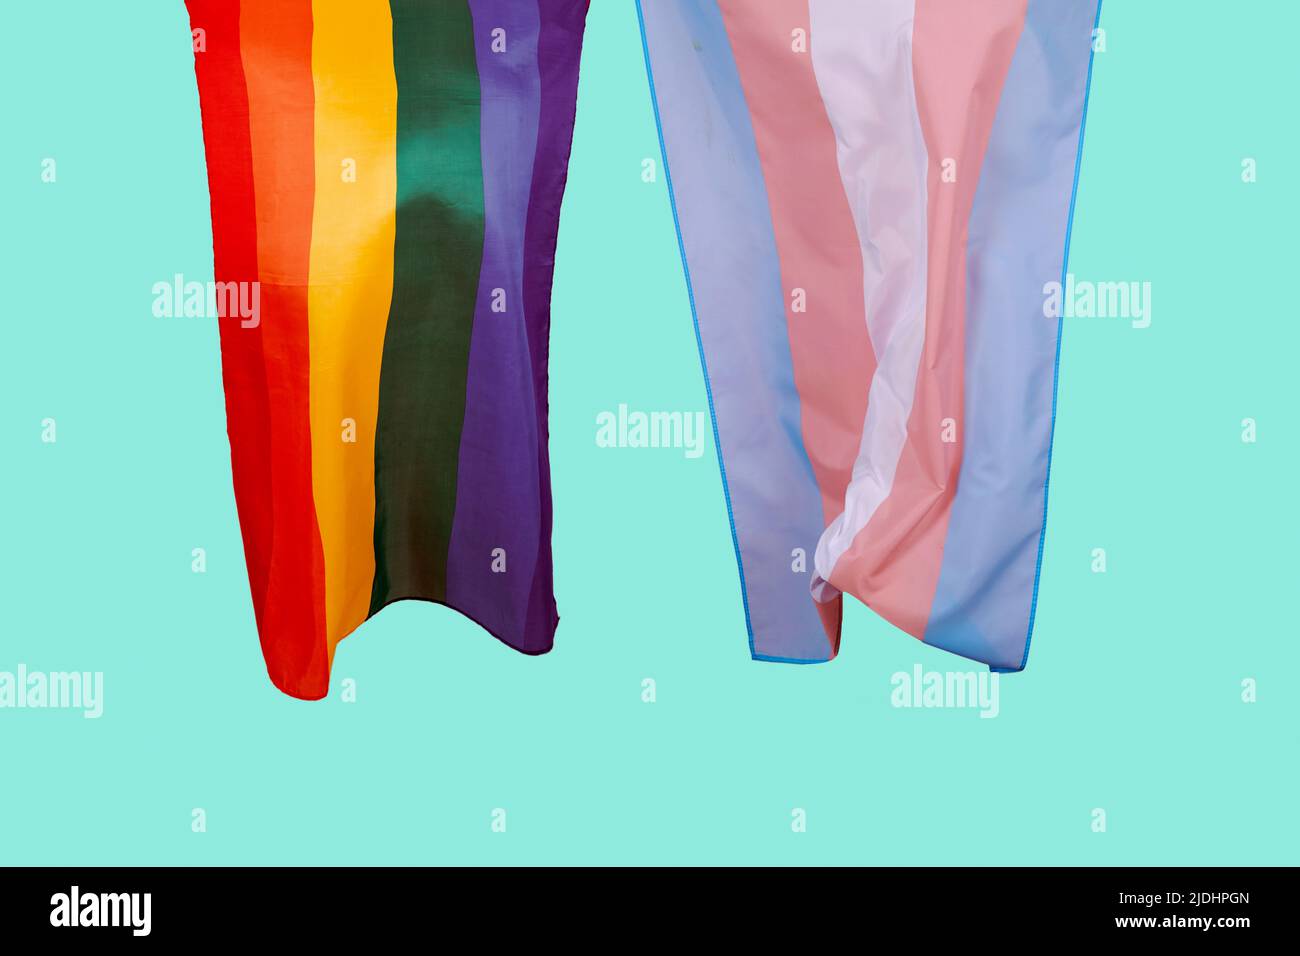 the gay pride flag and the transgender pride flag waving in the air on a greenish blue background Stock Photo